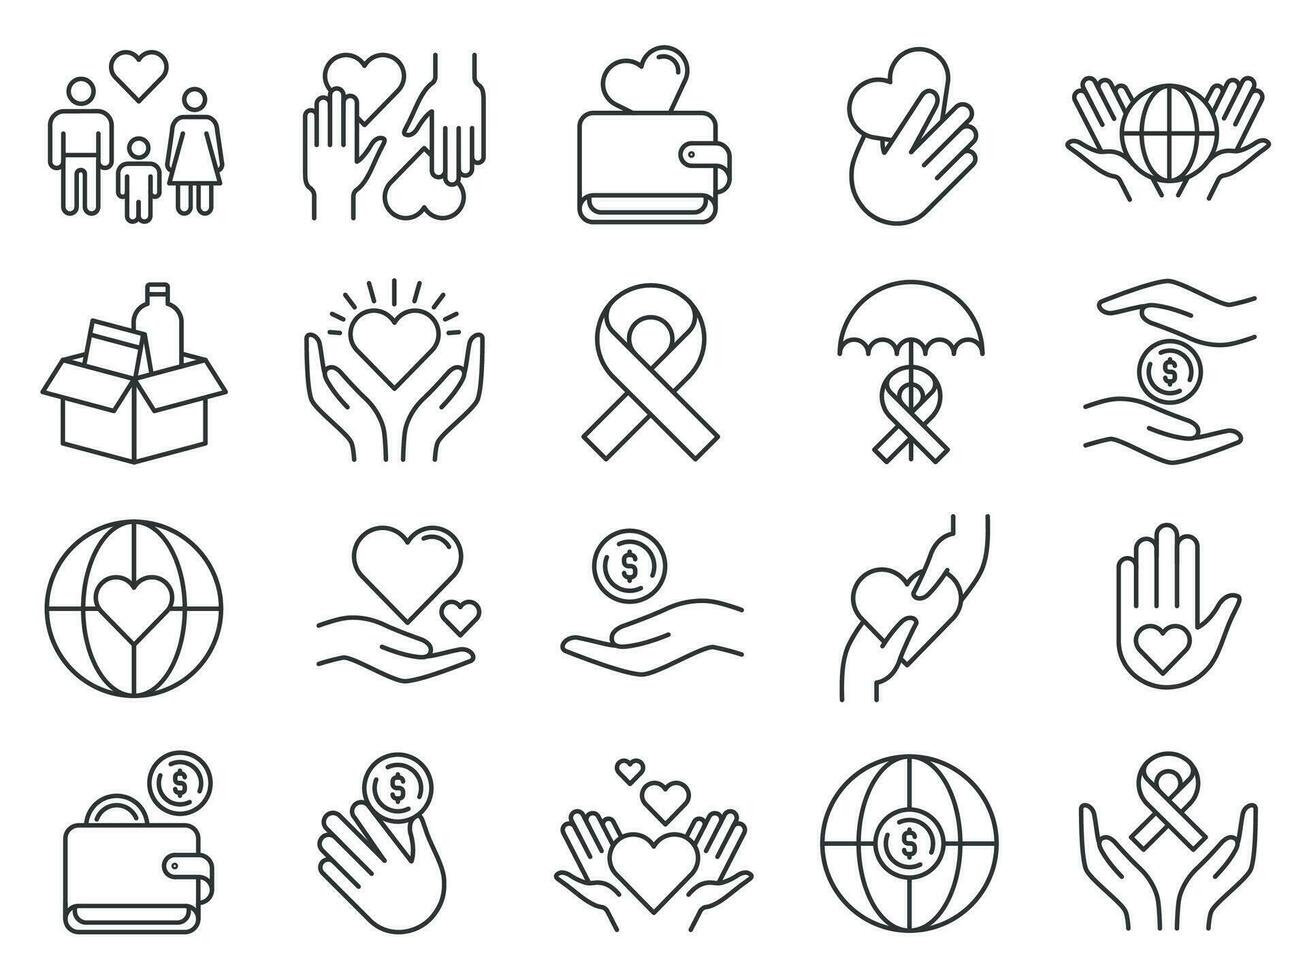 Charity and donation icon. Hands donating money and hearts. Community support icons. Family adopt, food help, aids, love and care vector set